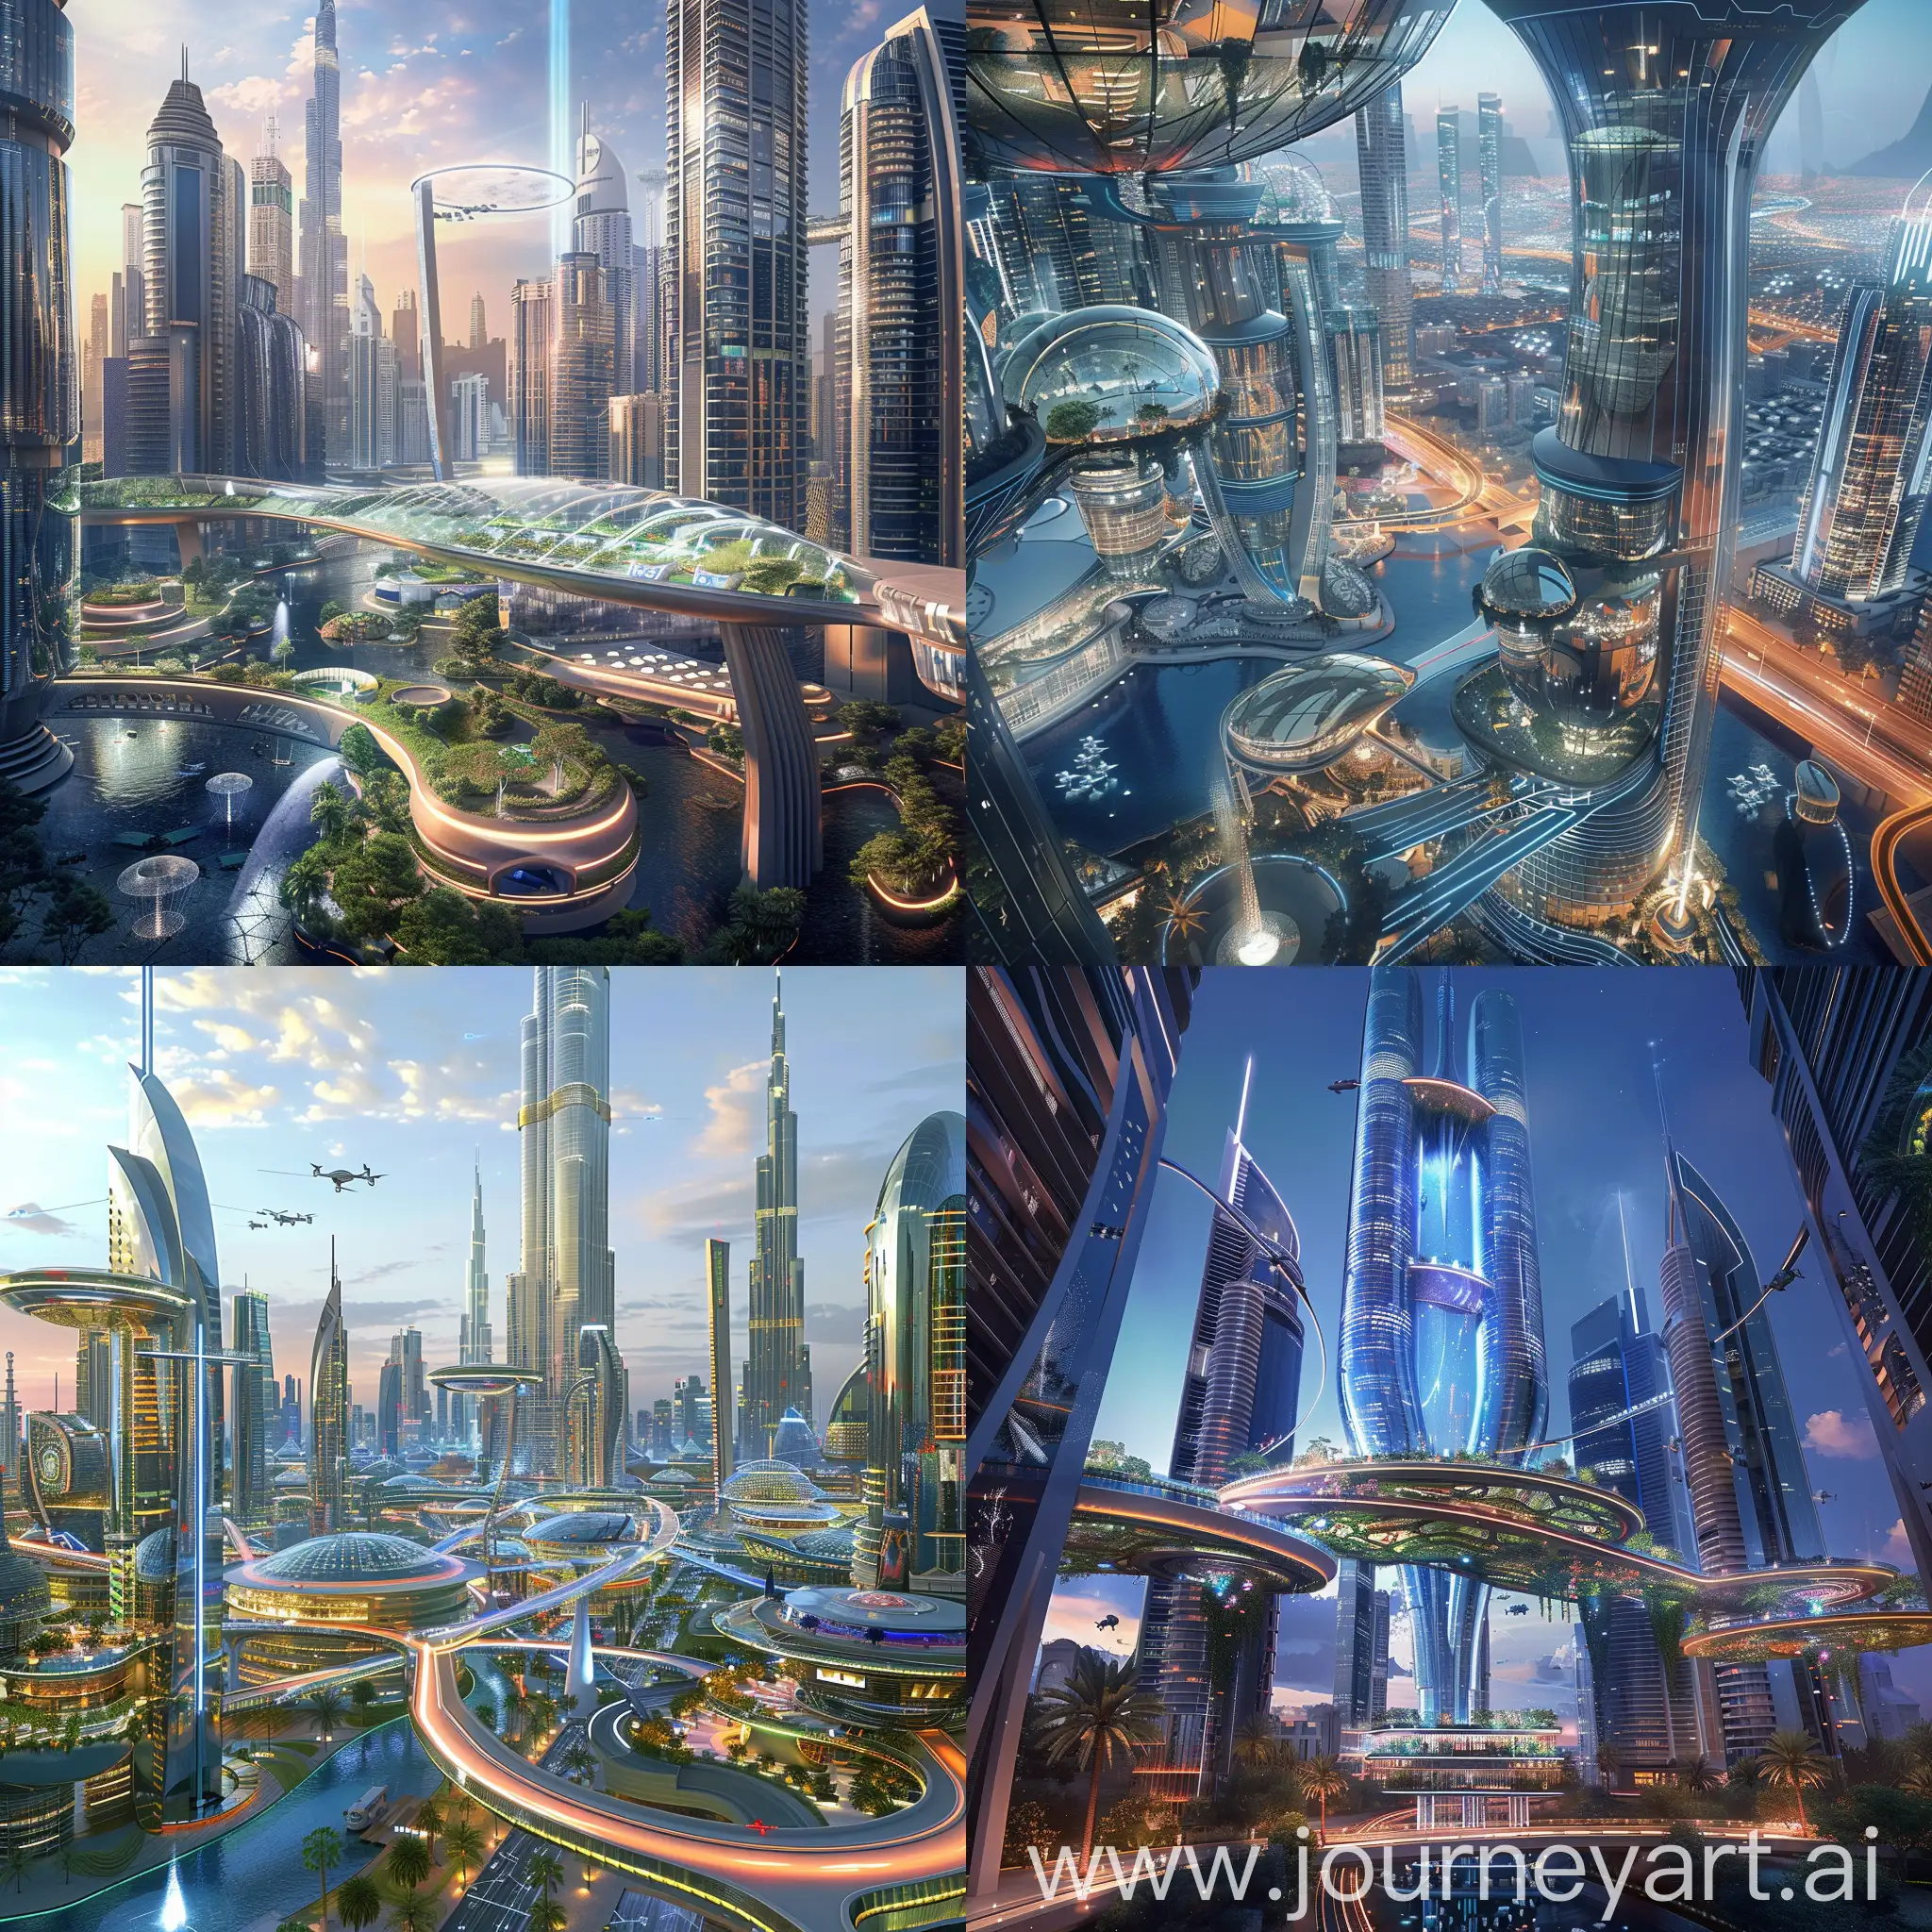 Futuristic-Dubai-Cityscape-with-Advanced-Science-and-Technology-Innovations